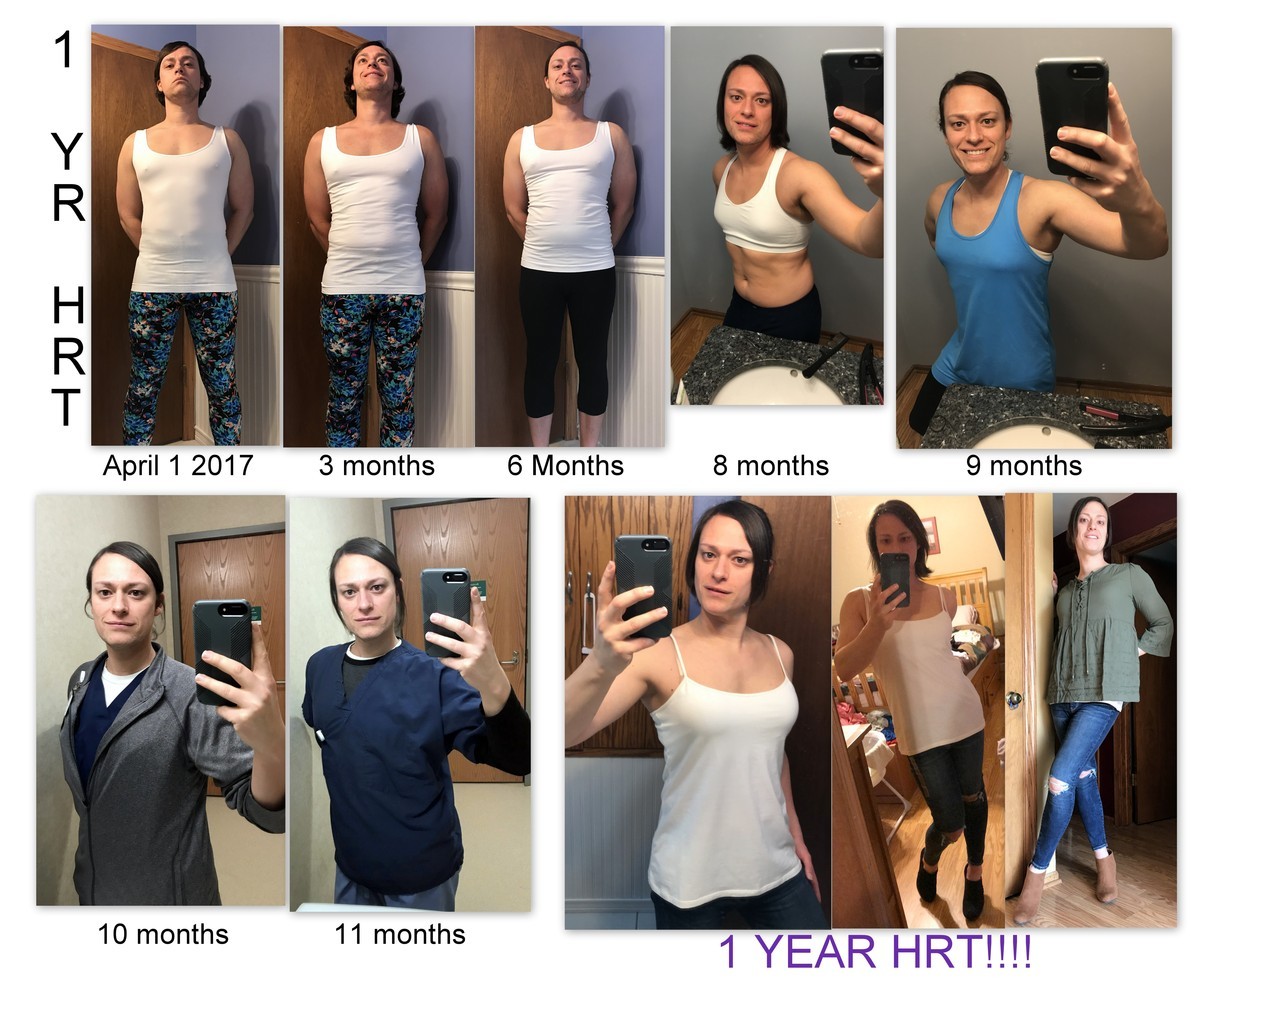 Authentic Erica — One Full Year On Hrt I Cannot Believe It Has